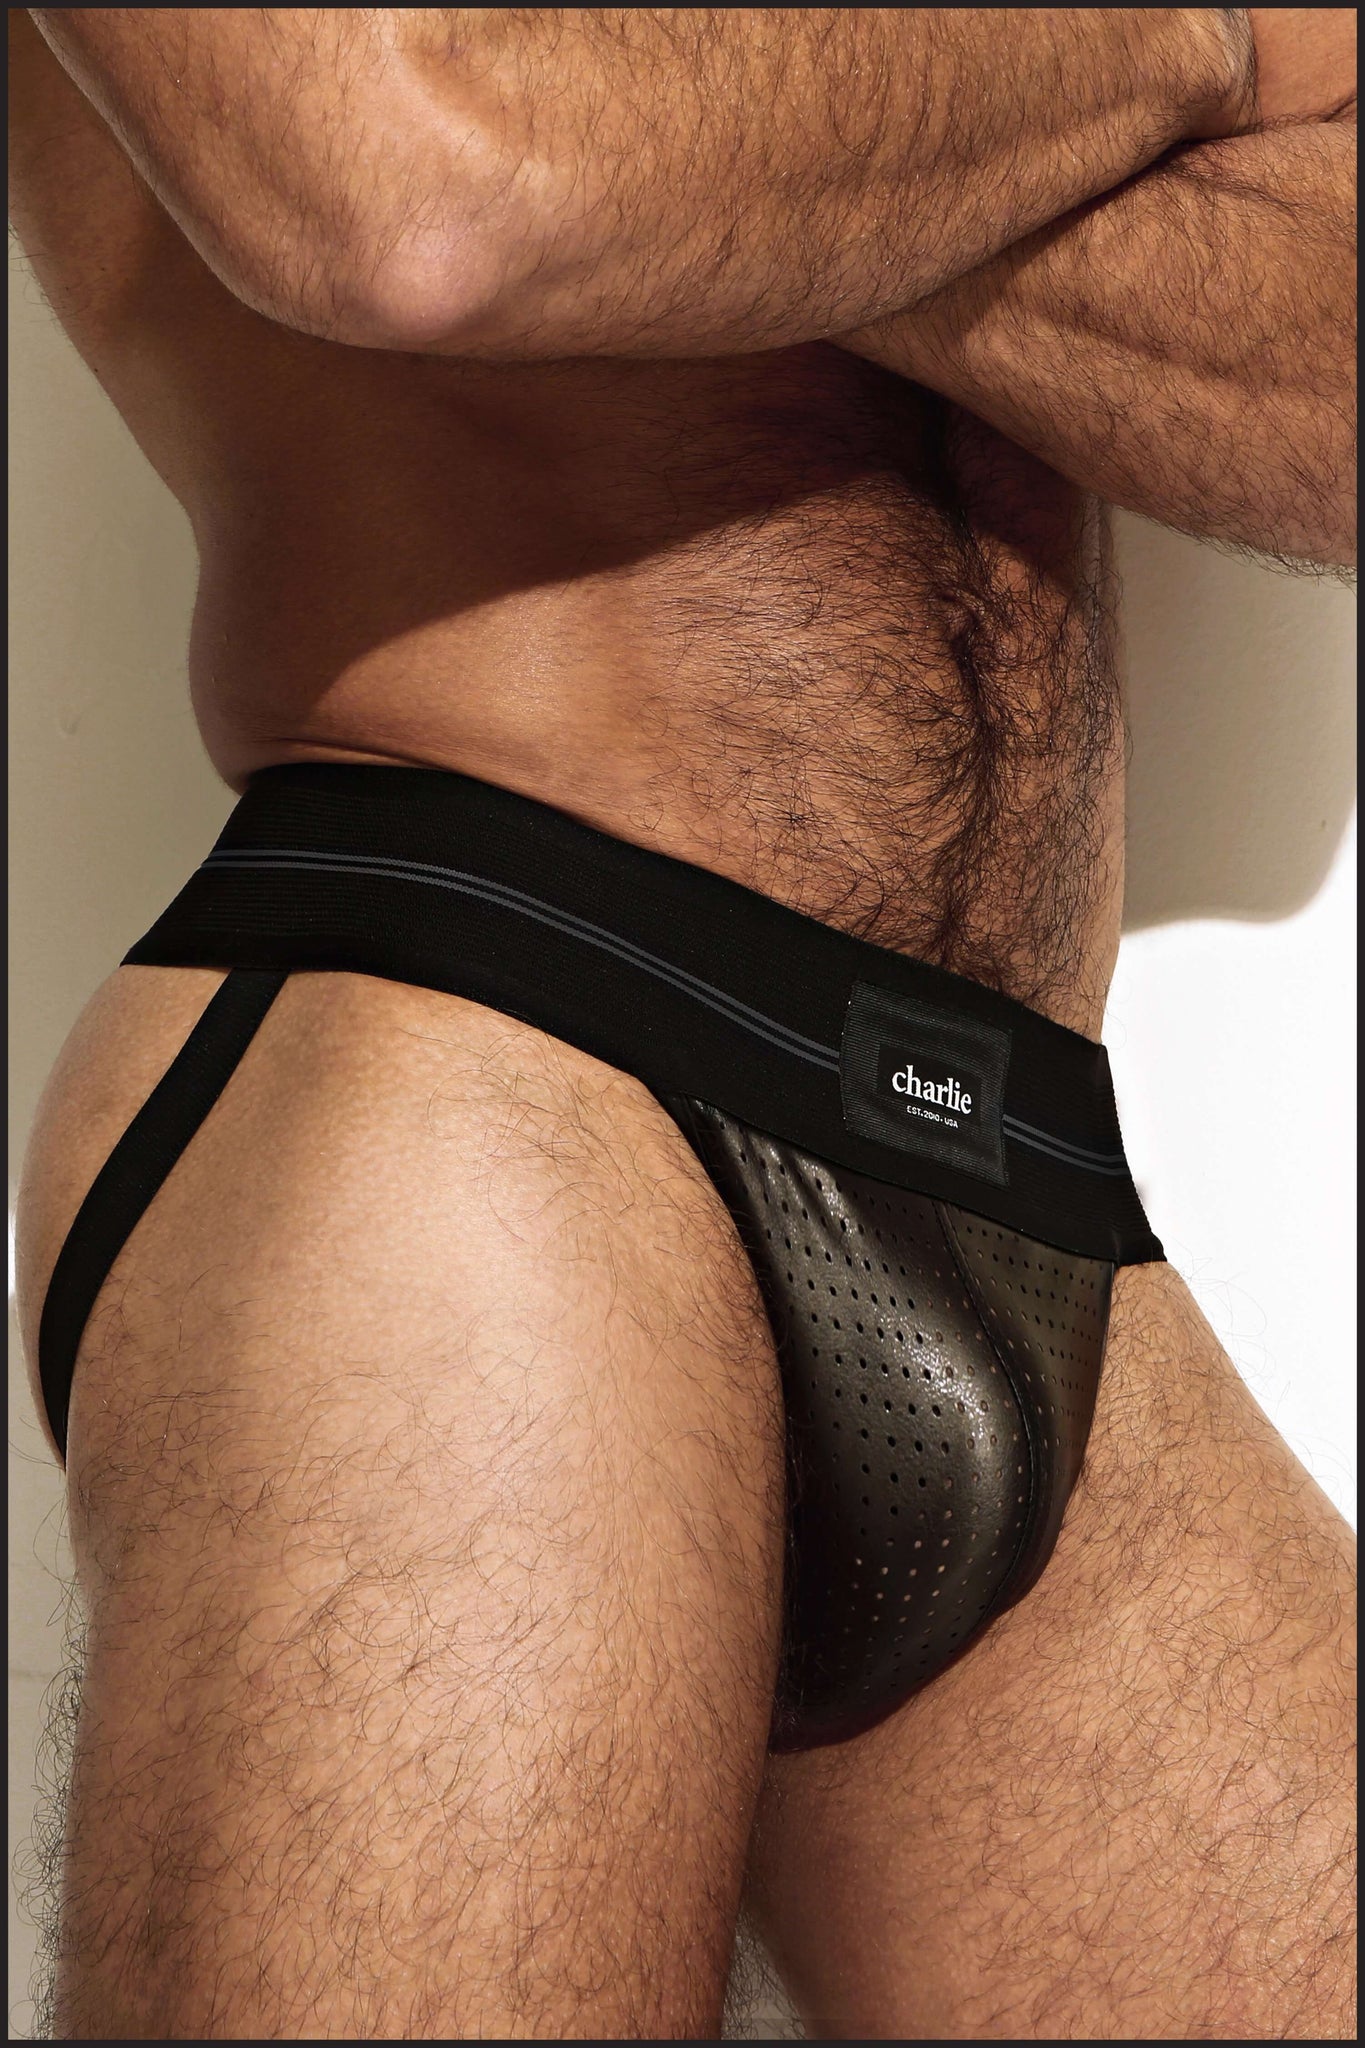 Charlie by Matthew Zink Mens Underwear Perforated Leather Pro Jock Strap